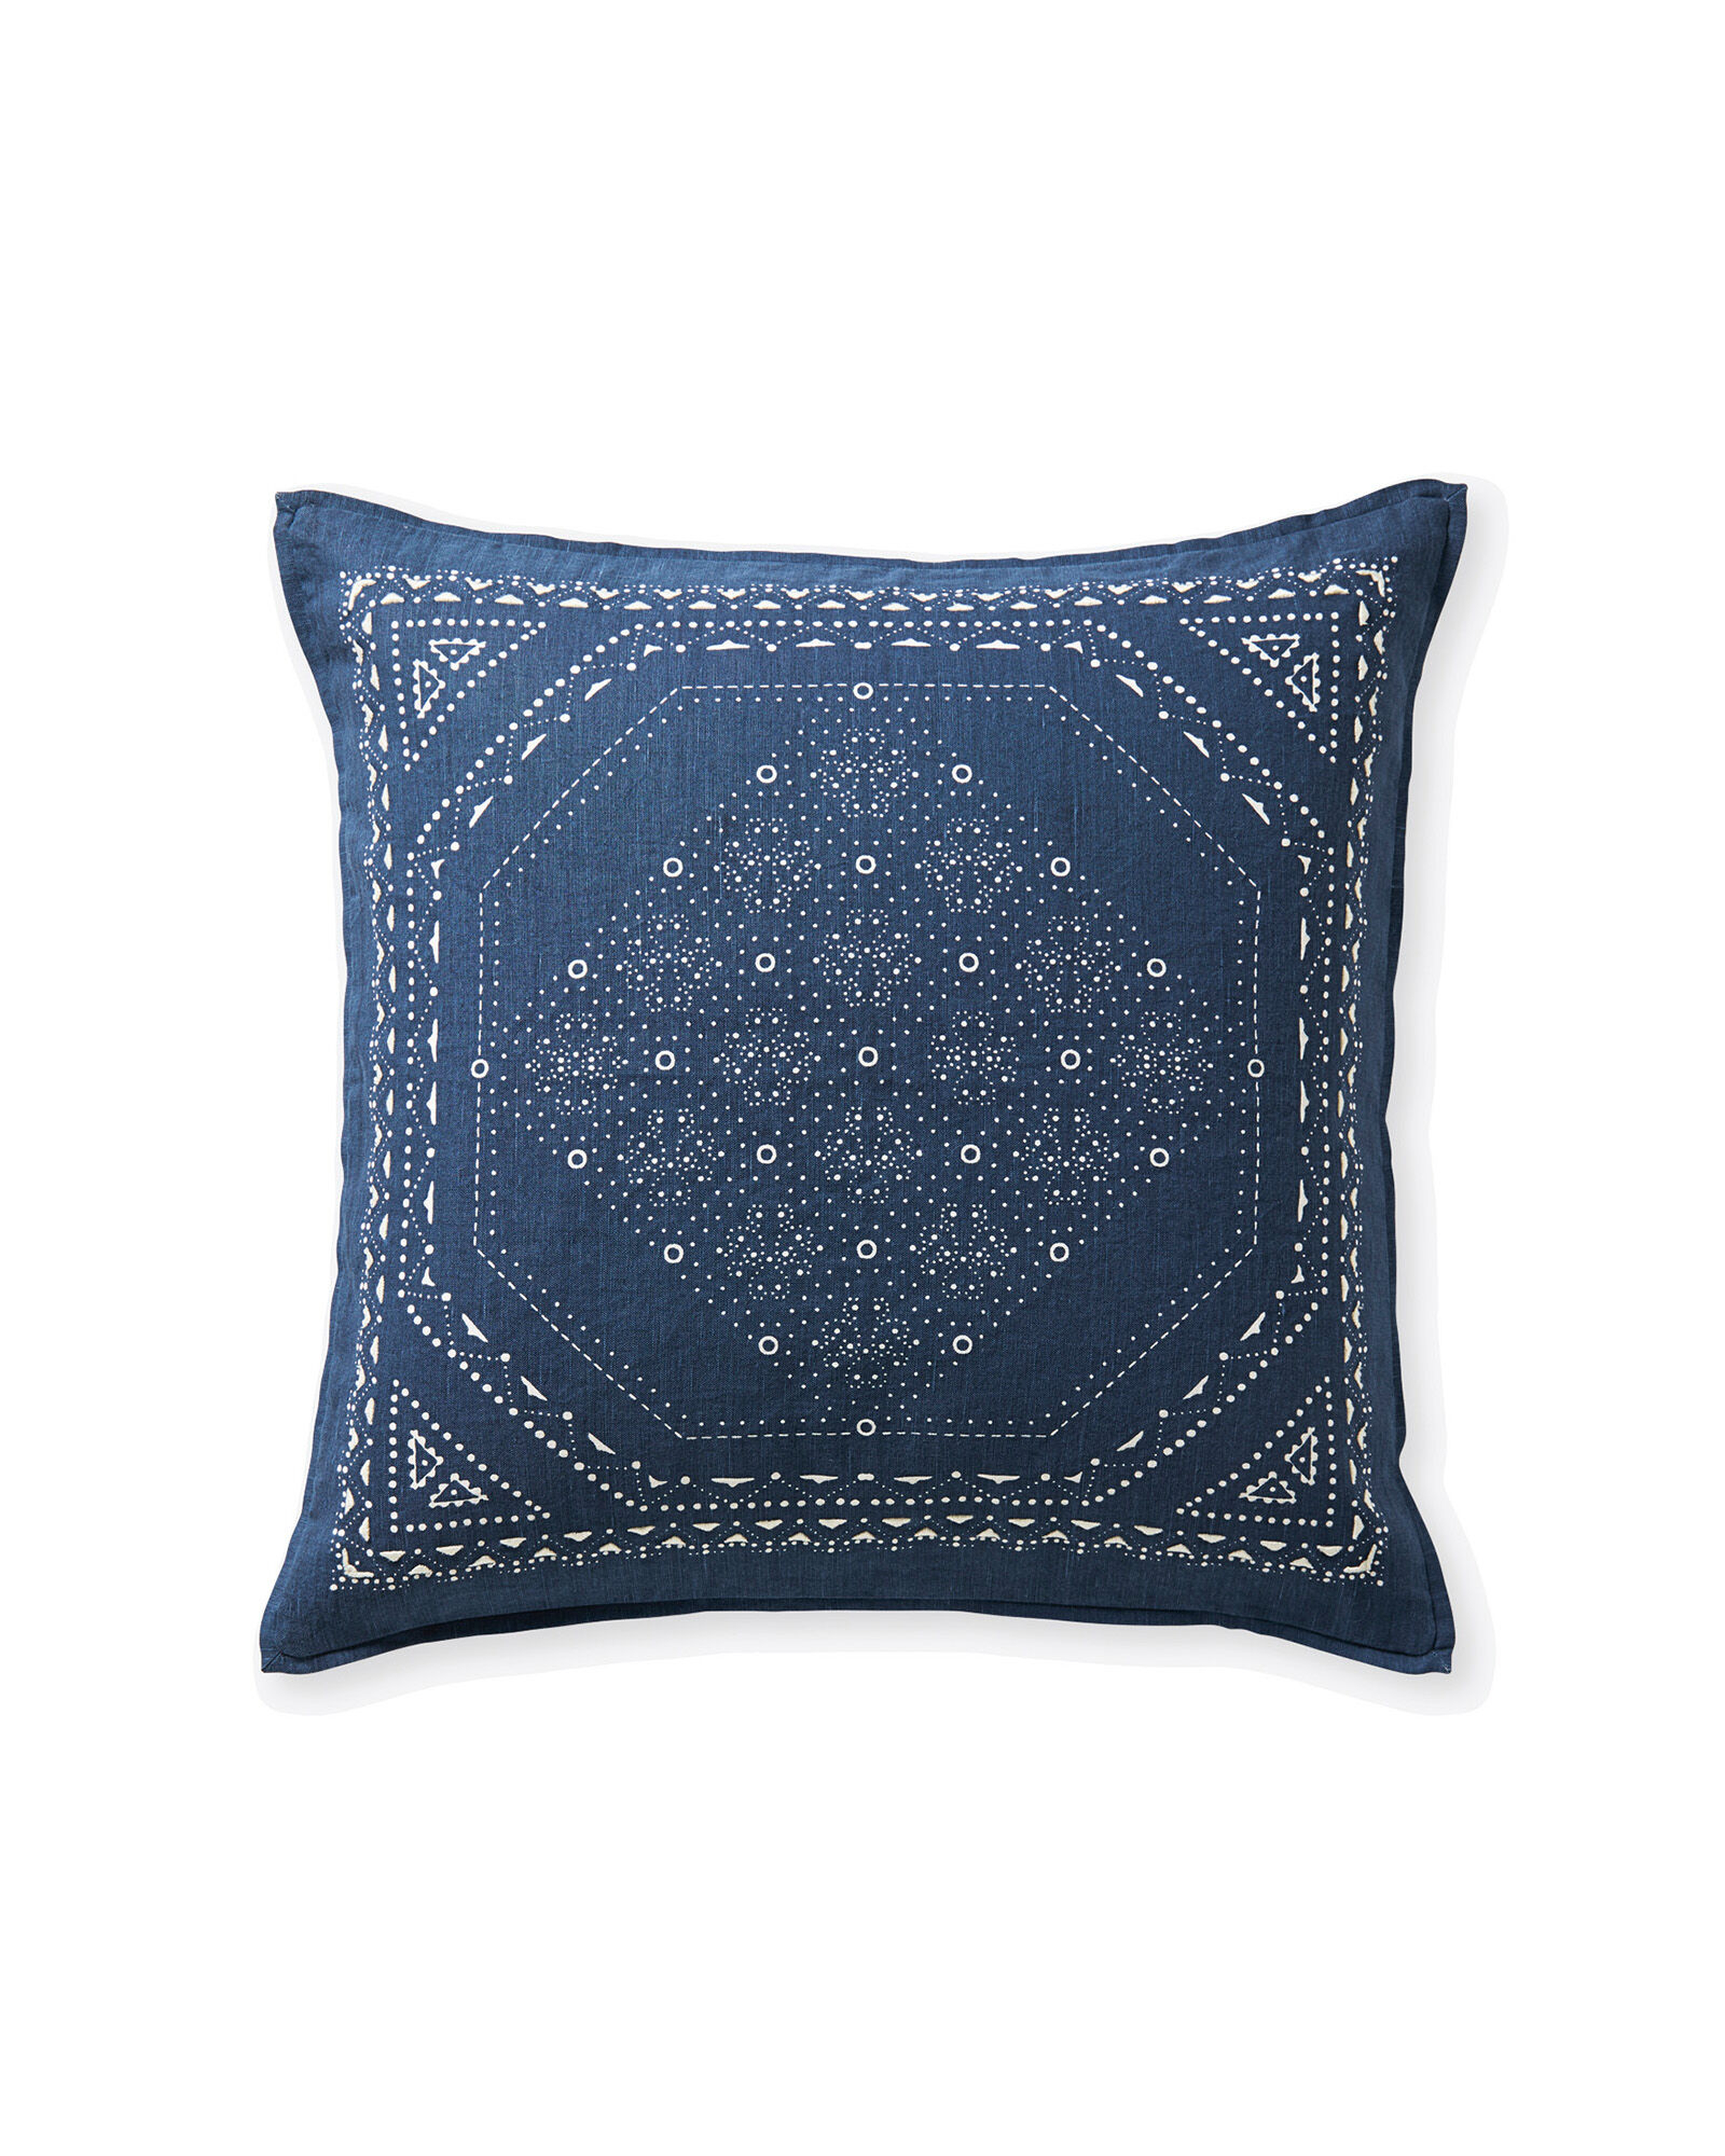 Oakdale Pillow Cover - Serena and Lily